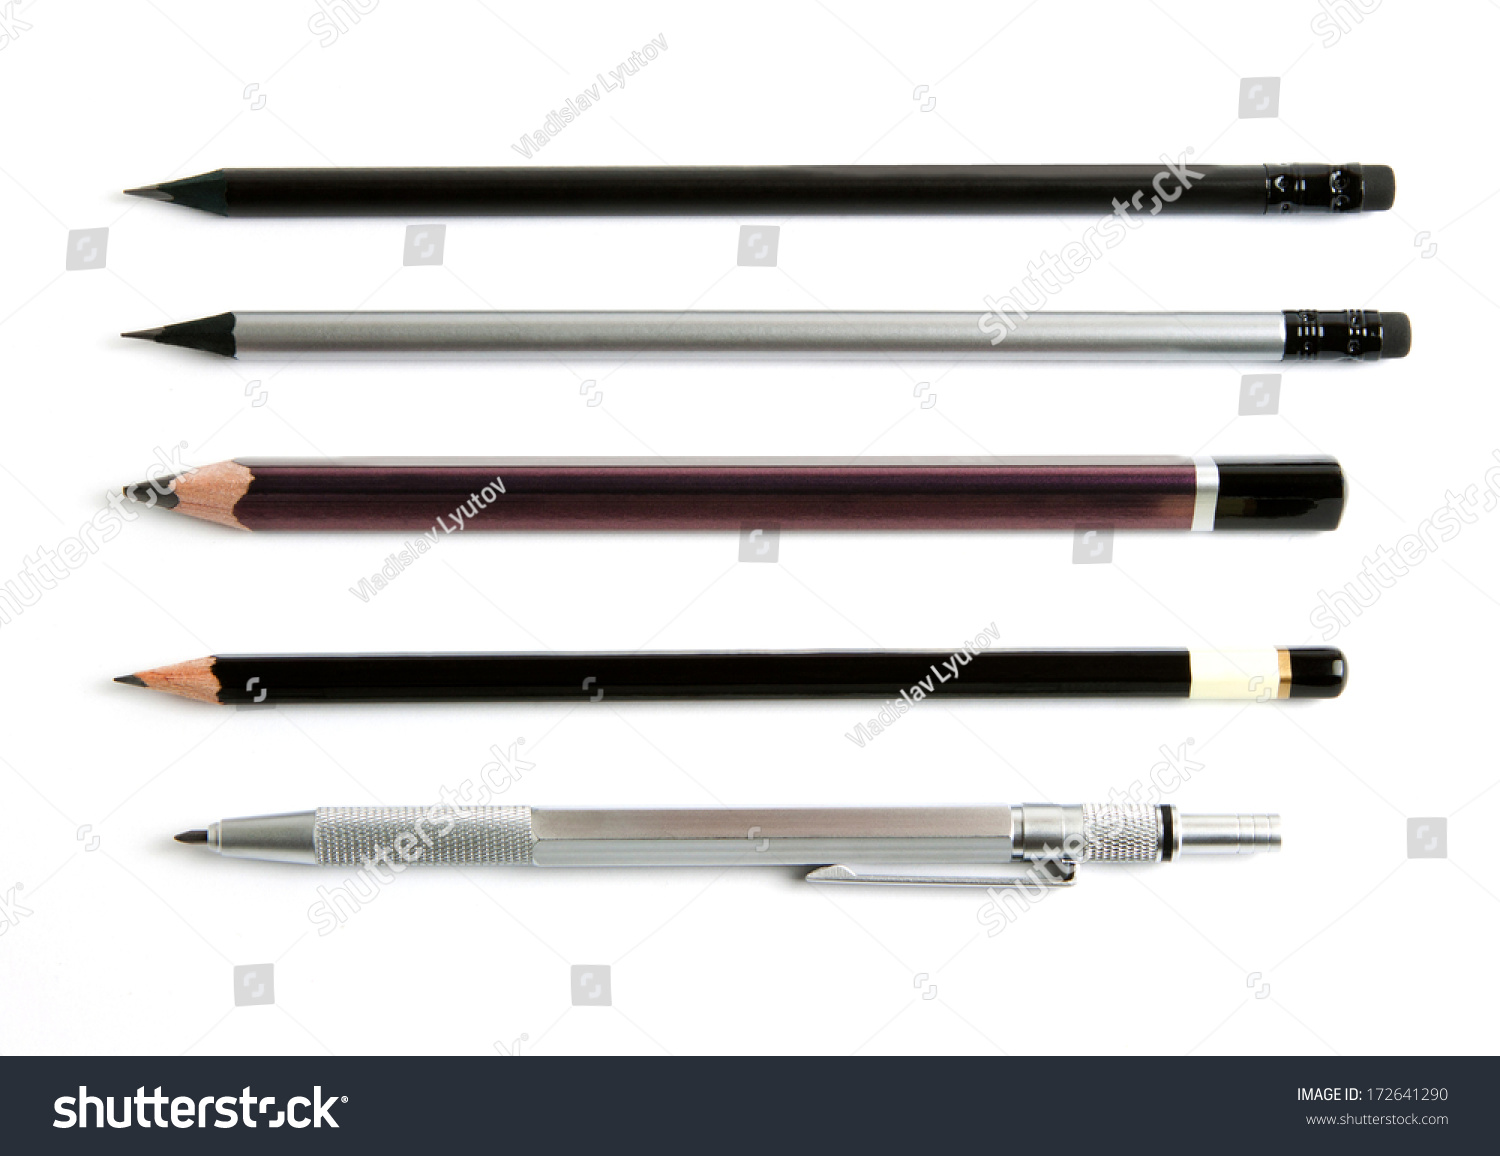 Lead Pencils Isolated On White, Several Pencils, Mechanical Pencil